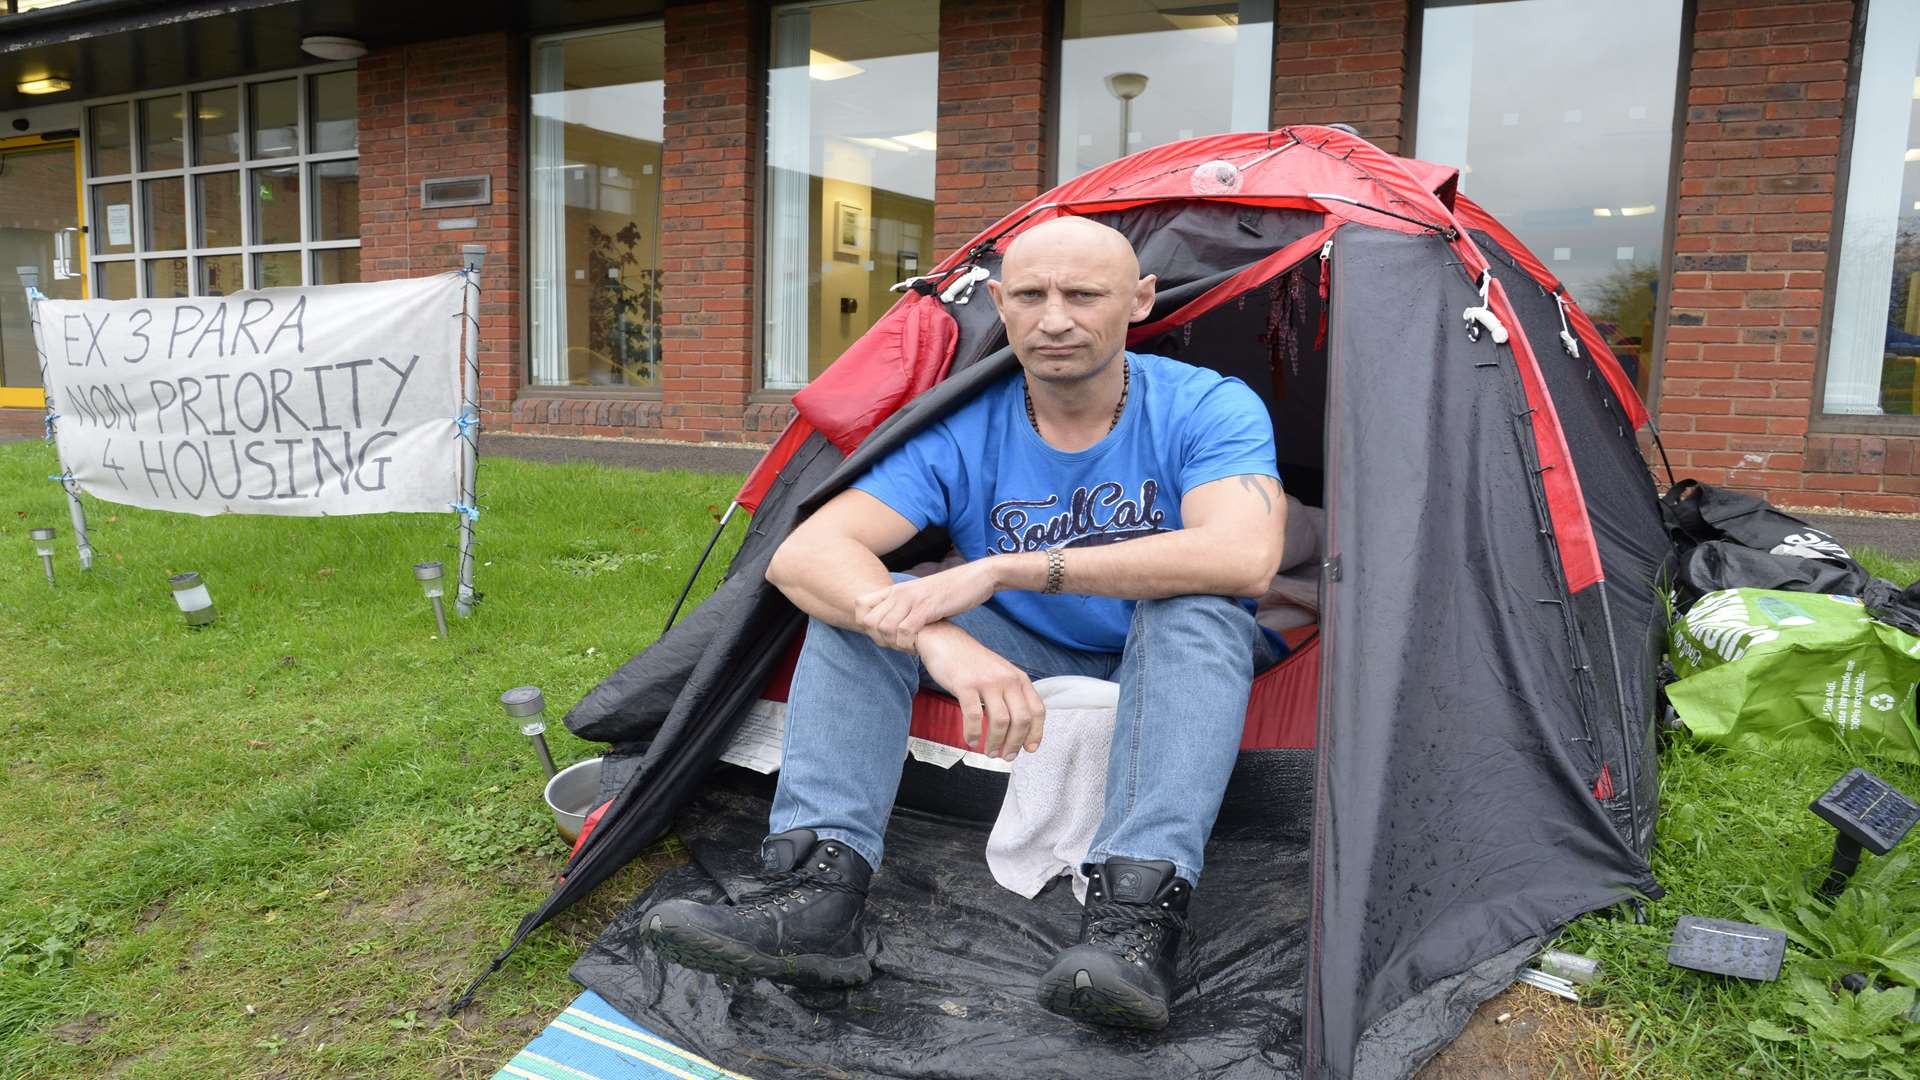 Robert Shaw protesting outside the council offices on Thursday for not being given housing priority for being an ex-serviceman. Picture: Chris Davey